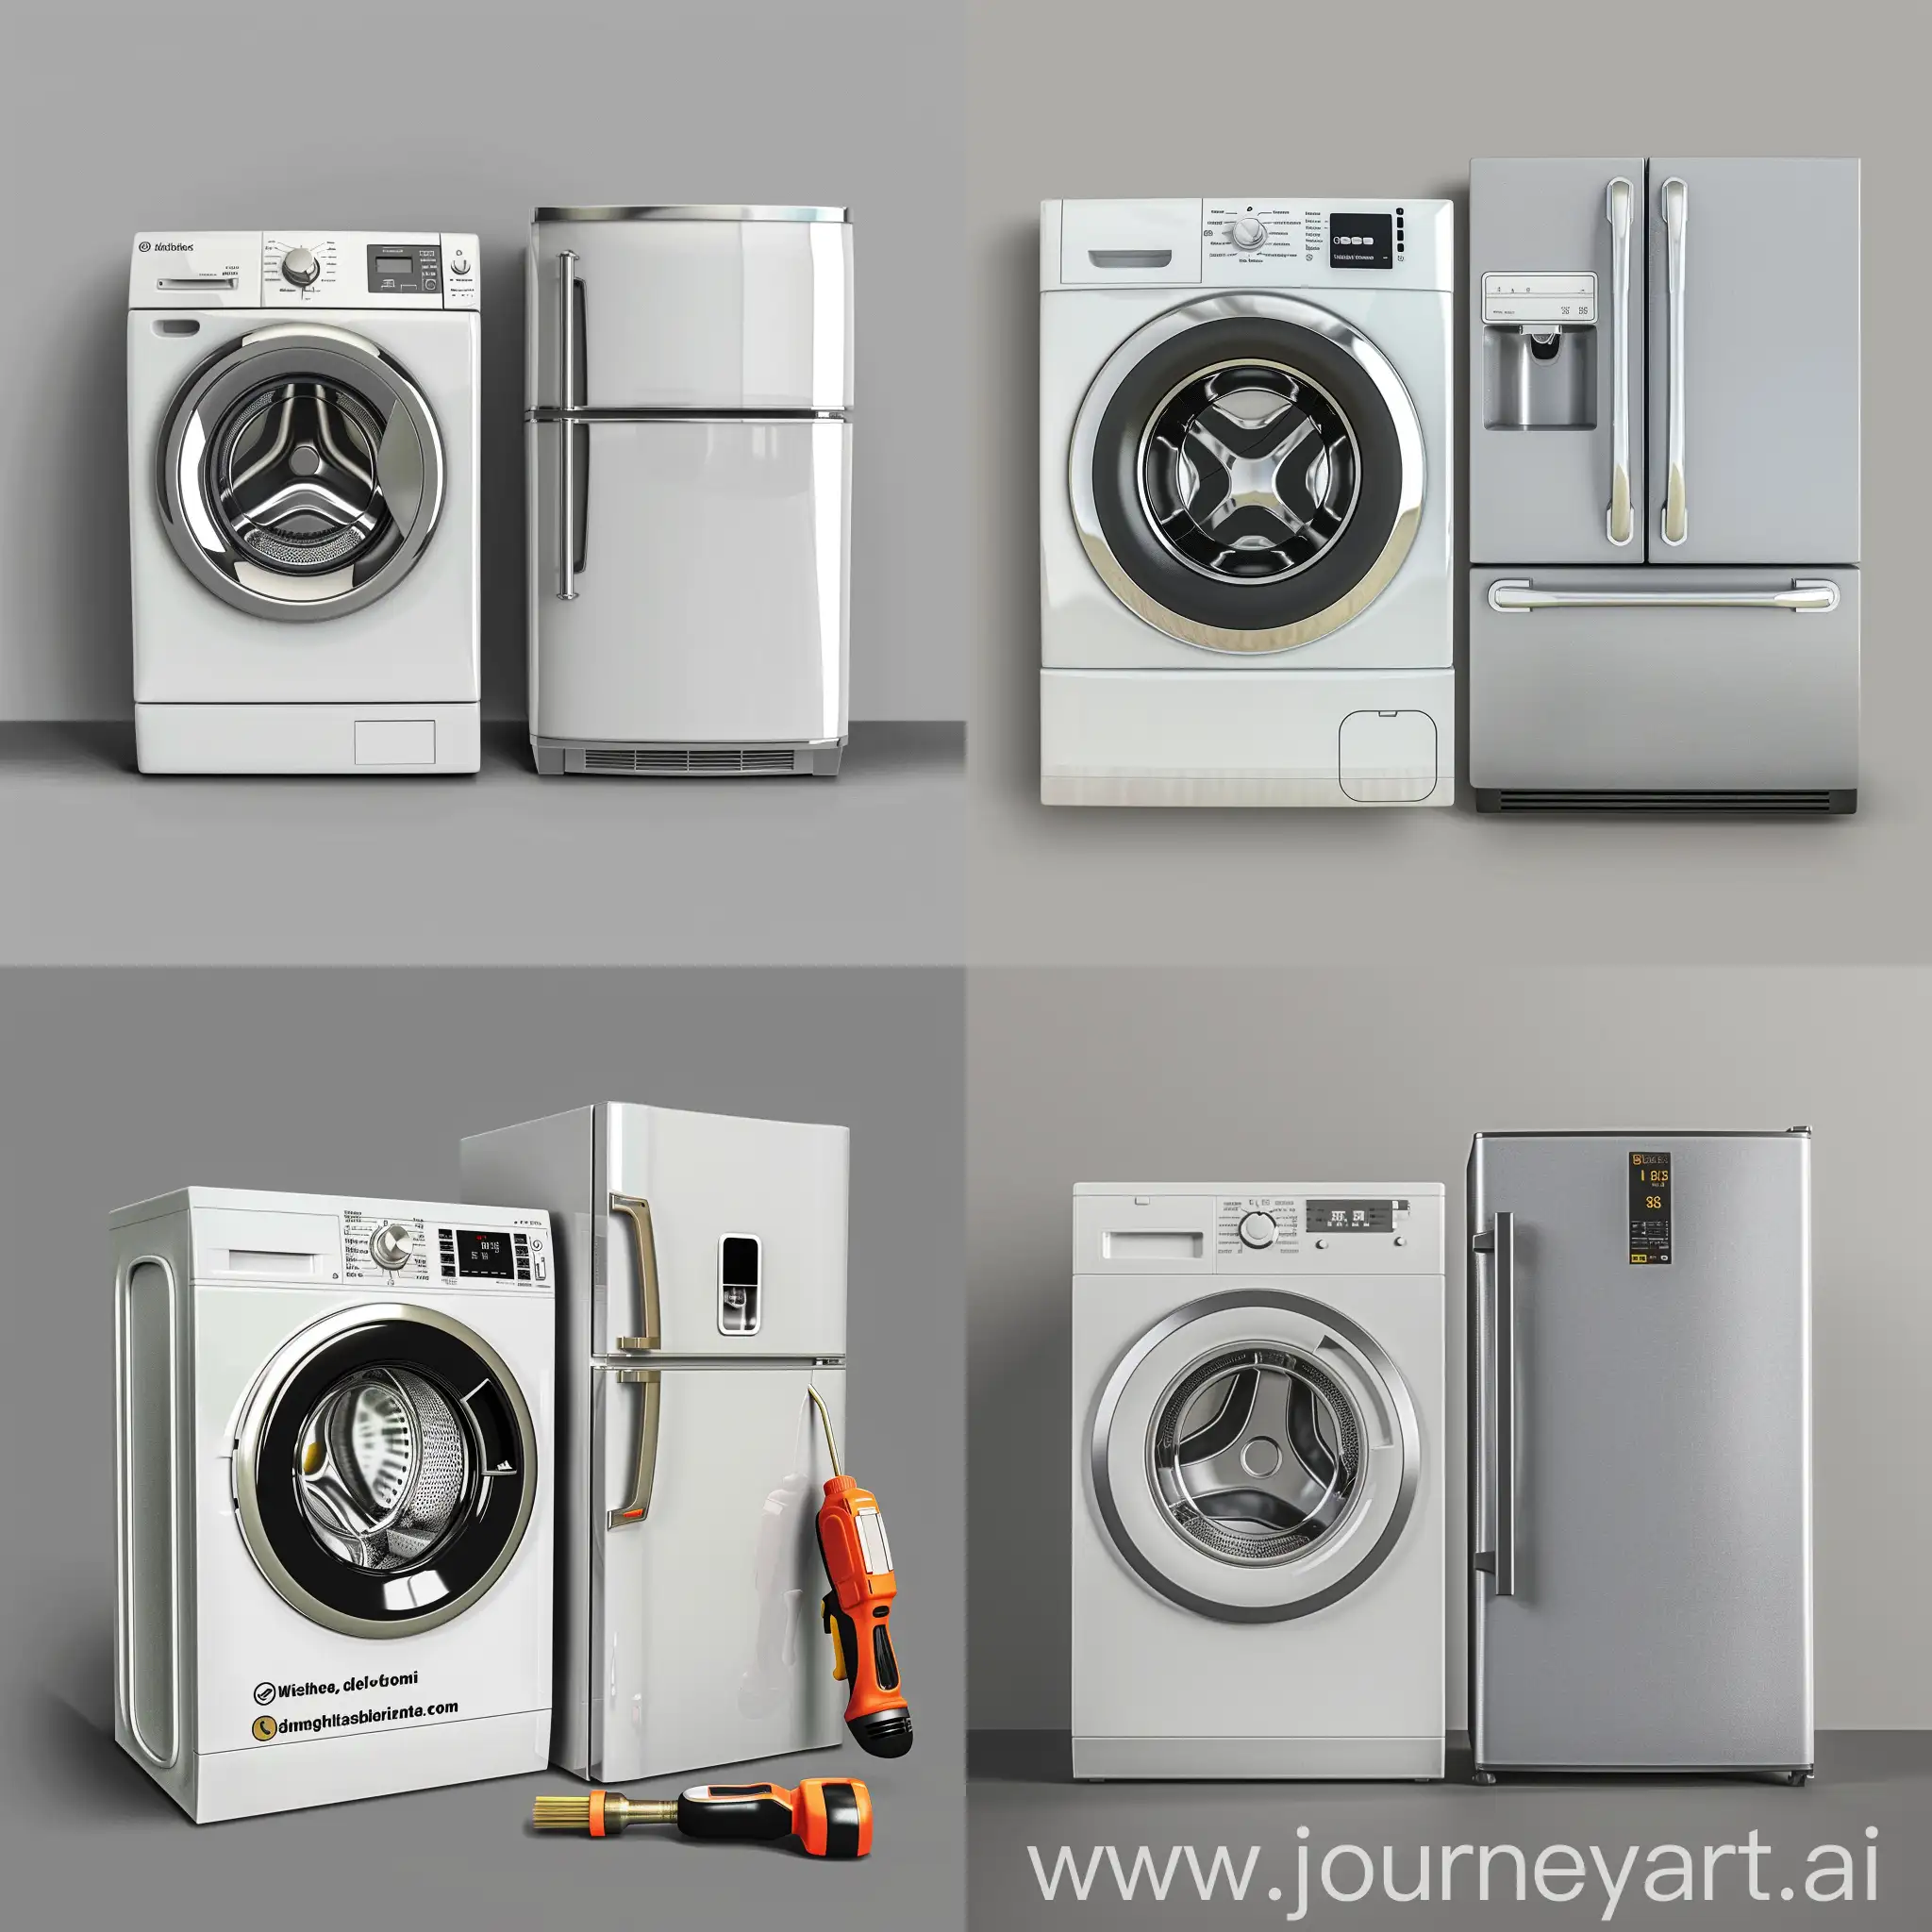 Appliance-Repair-Services-Washing-Machine-and-Refrigerator